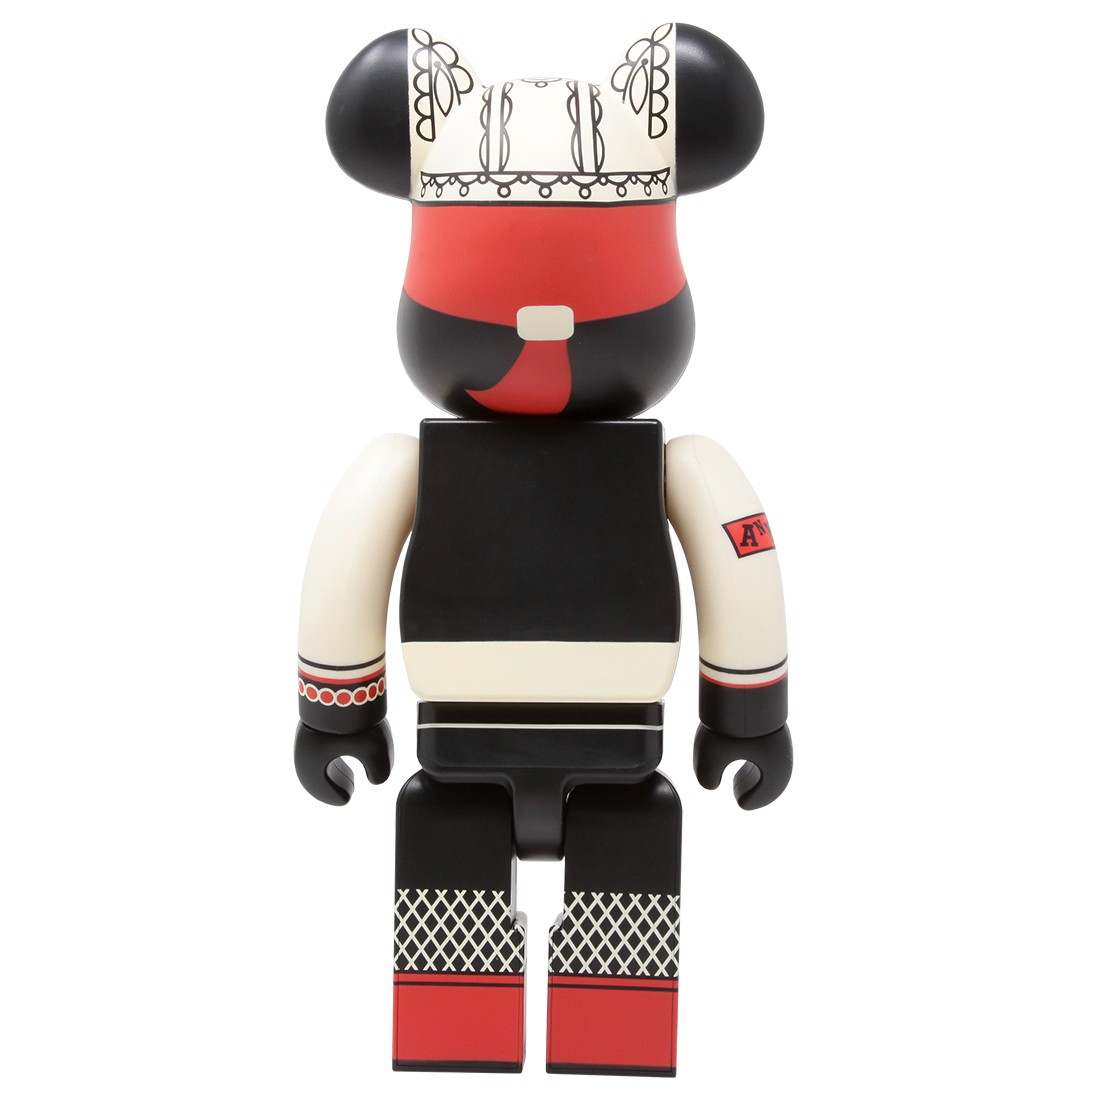 BE@RBRICK ANNA SUI RED&BEIGE　400％